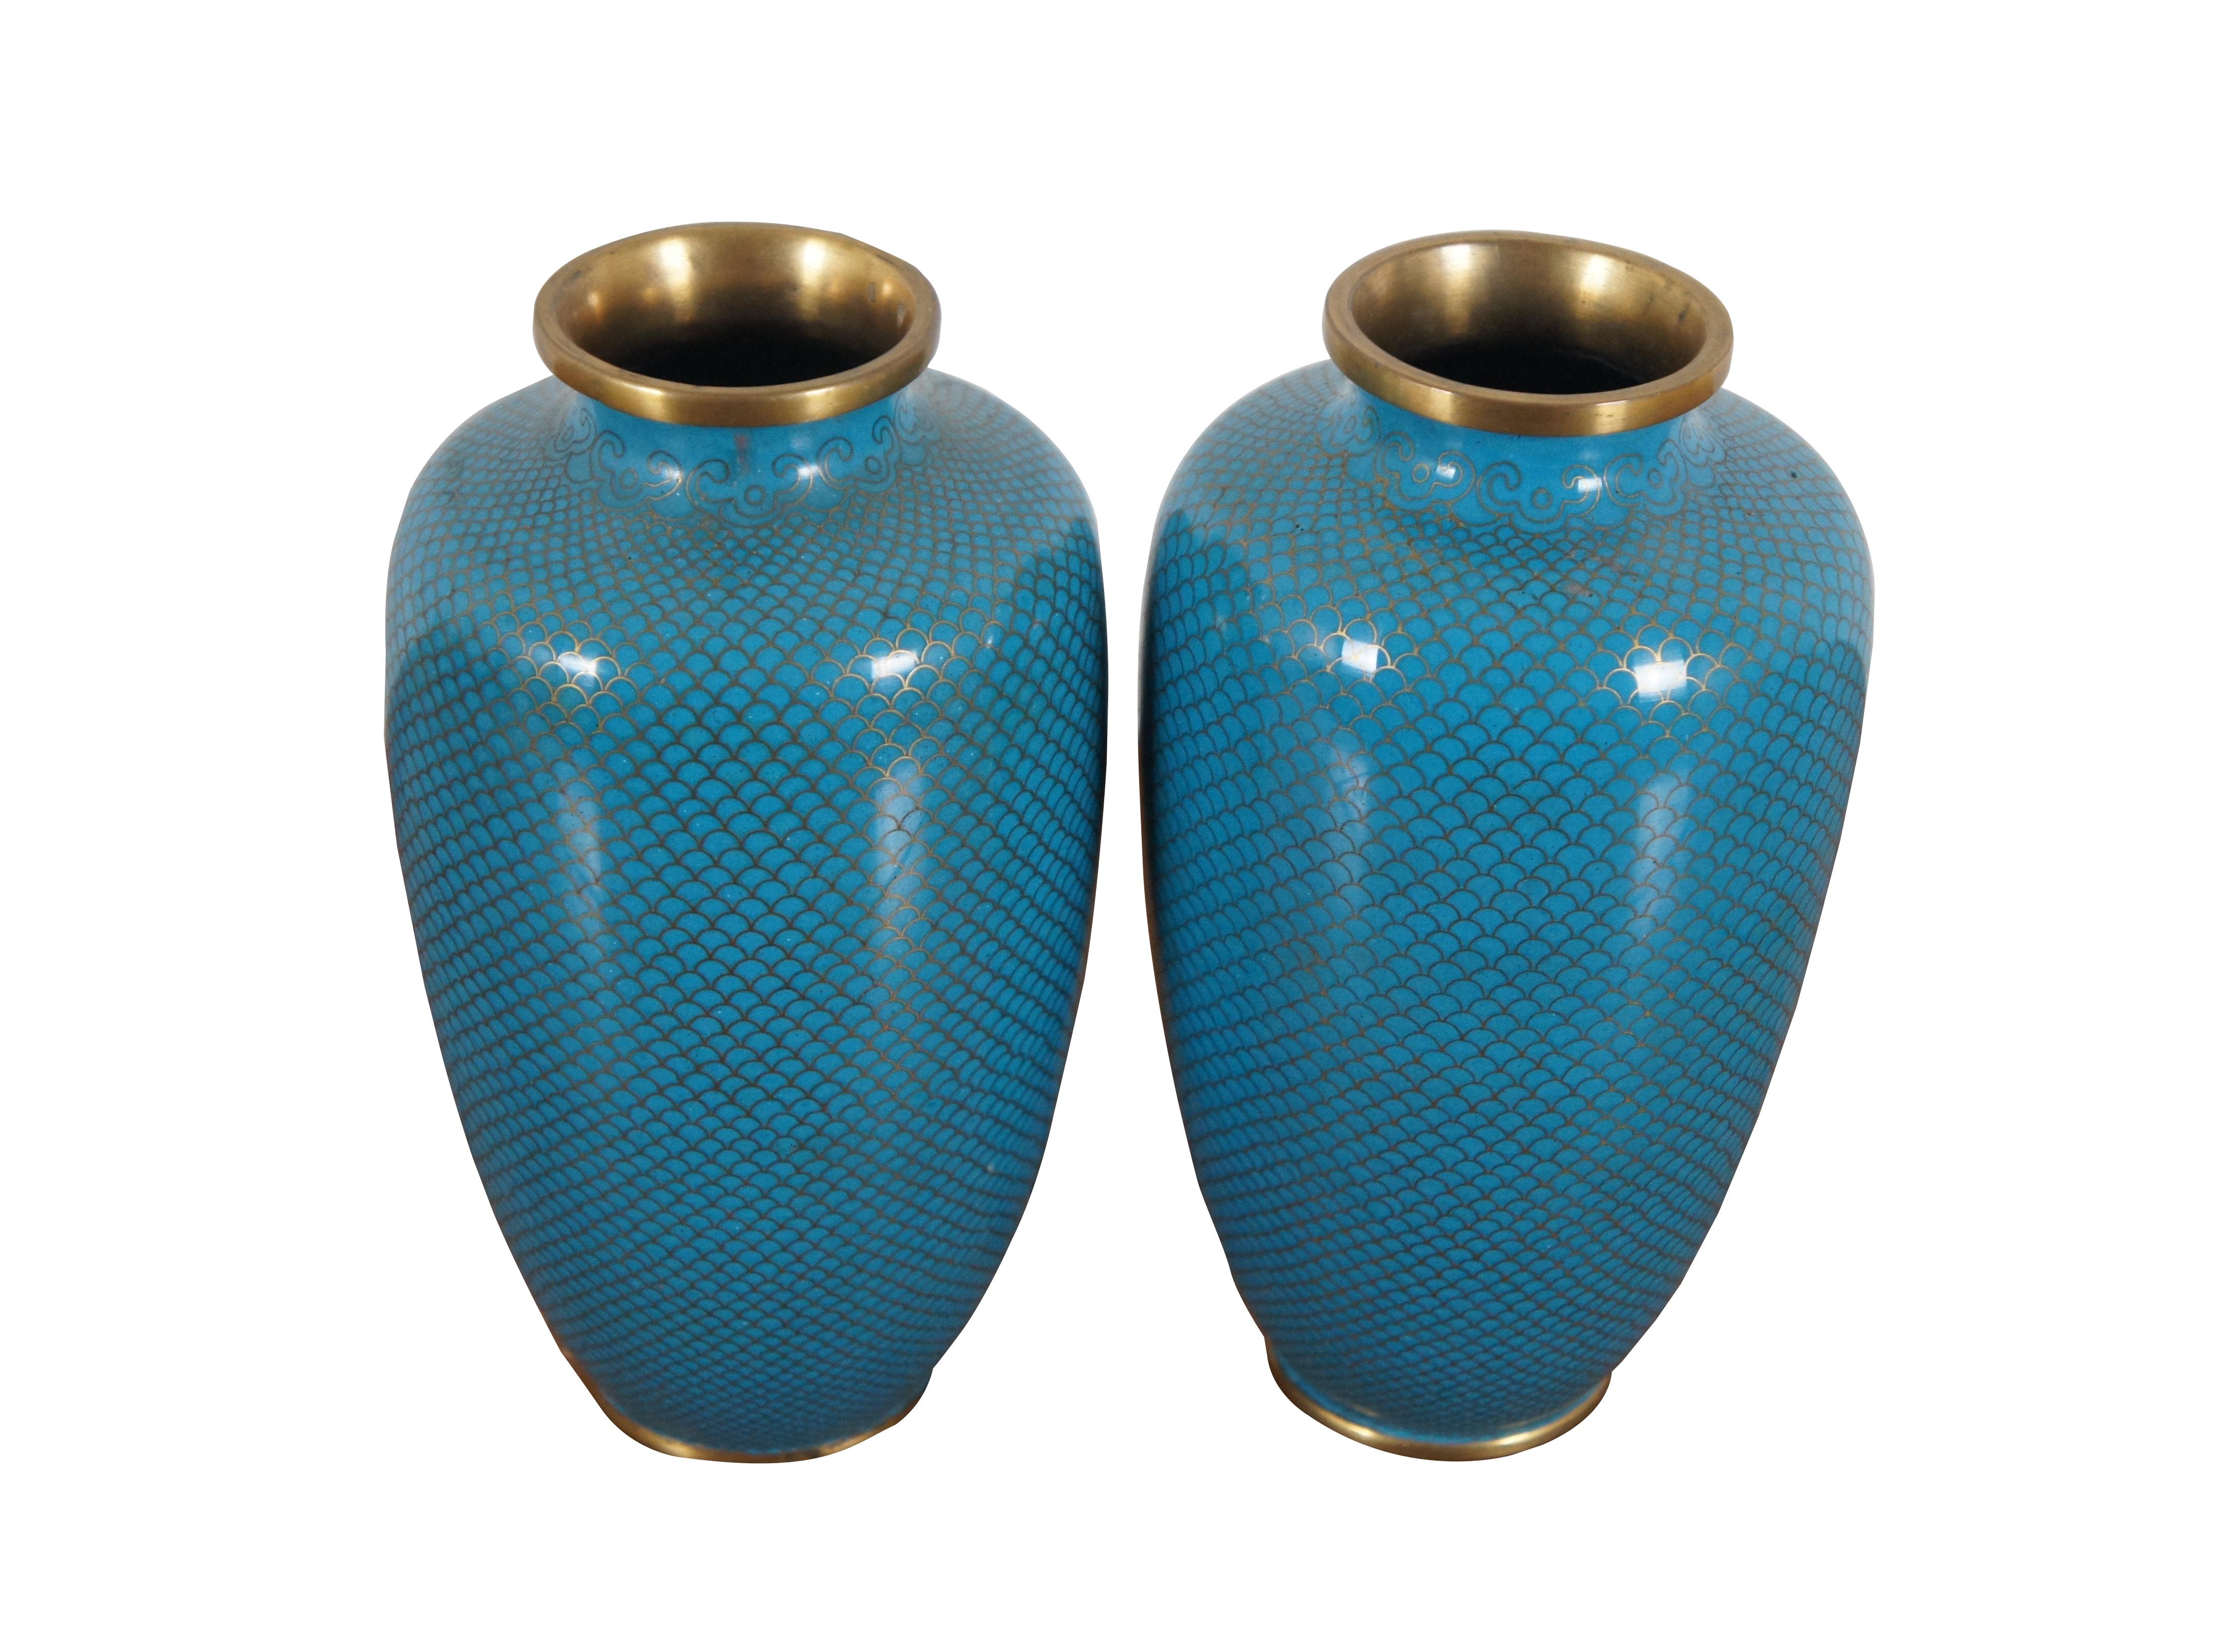 Vintage pair of Chinese cloisonné enameled vases featuring a simple fish scale design in blue / turquoise. Marked China on base. Circa 1890s-1910


Dimensions:
4